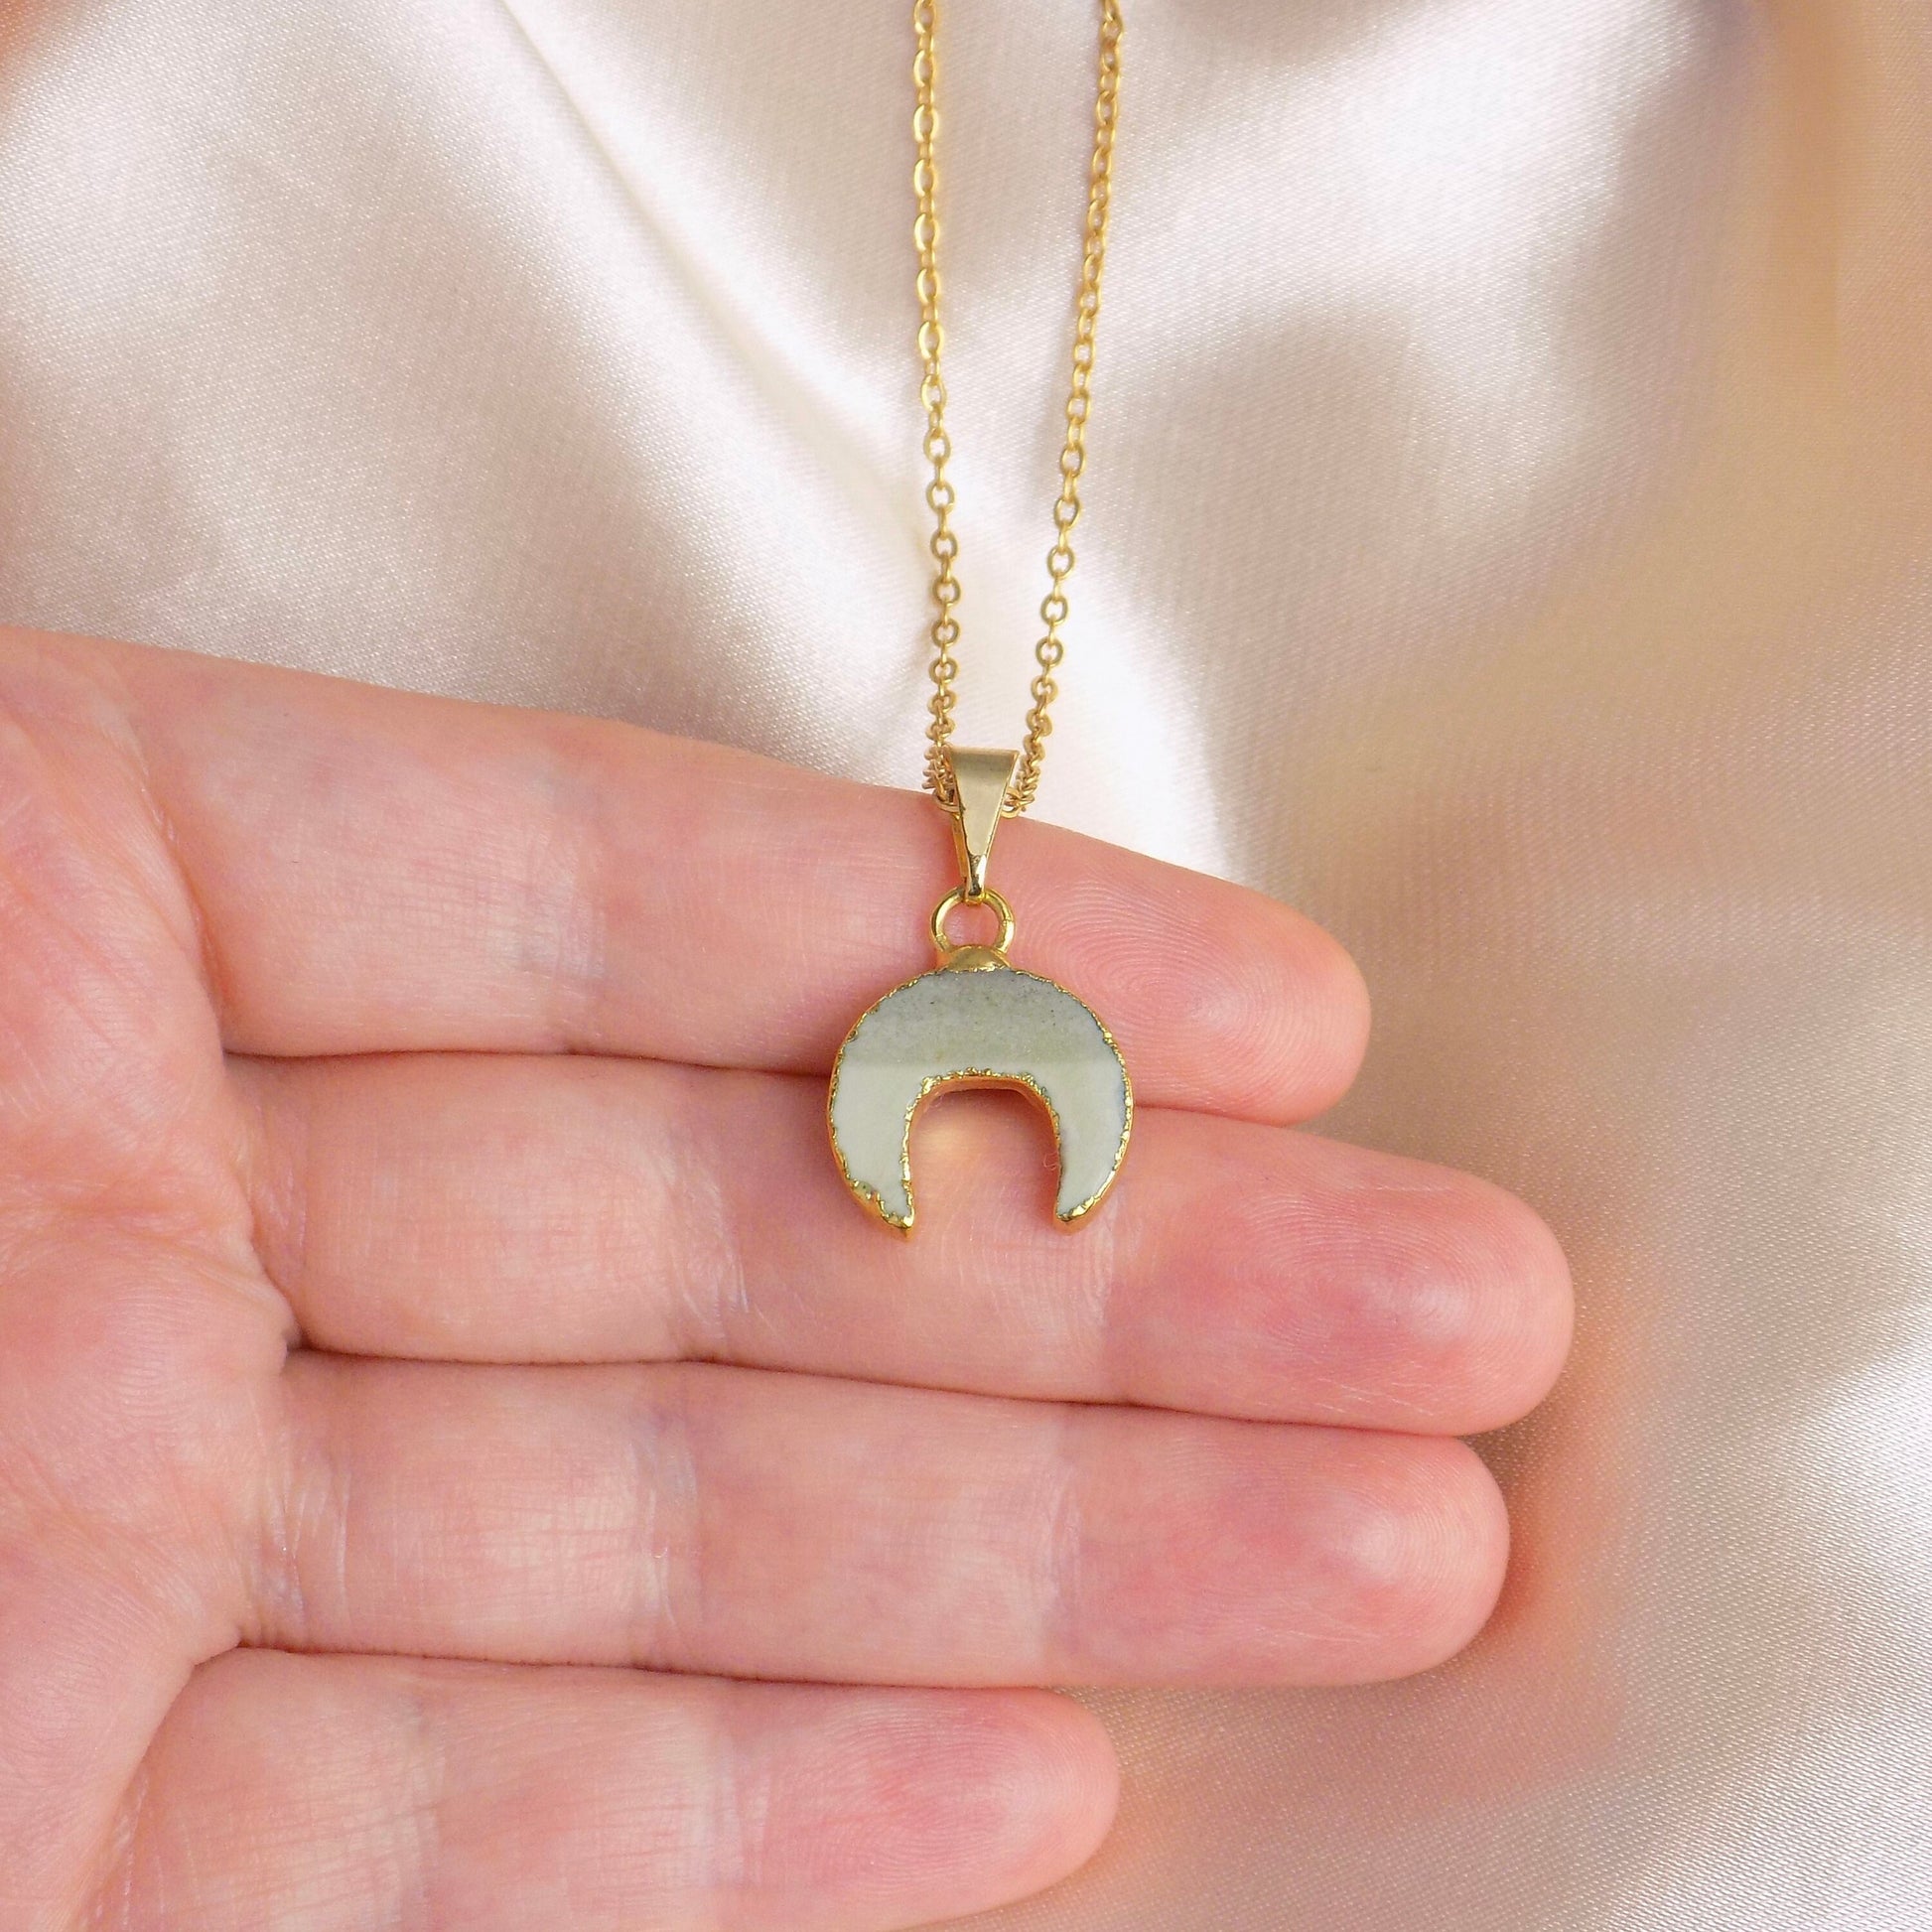 Small Double Horn Necklace Gold, Green Jasper Gemstone Pendant, Gifts For Her, M6-778